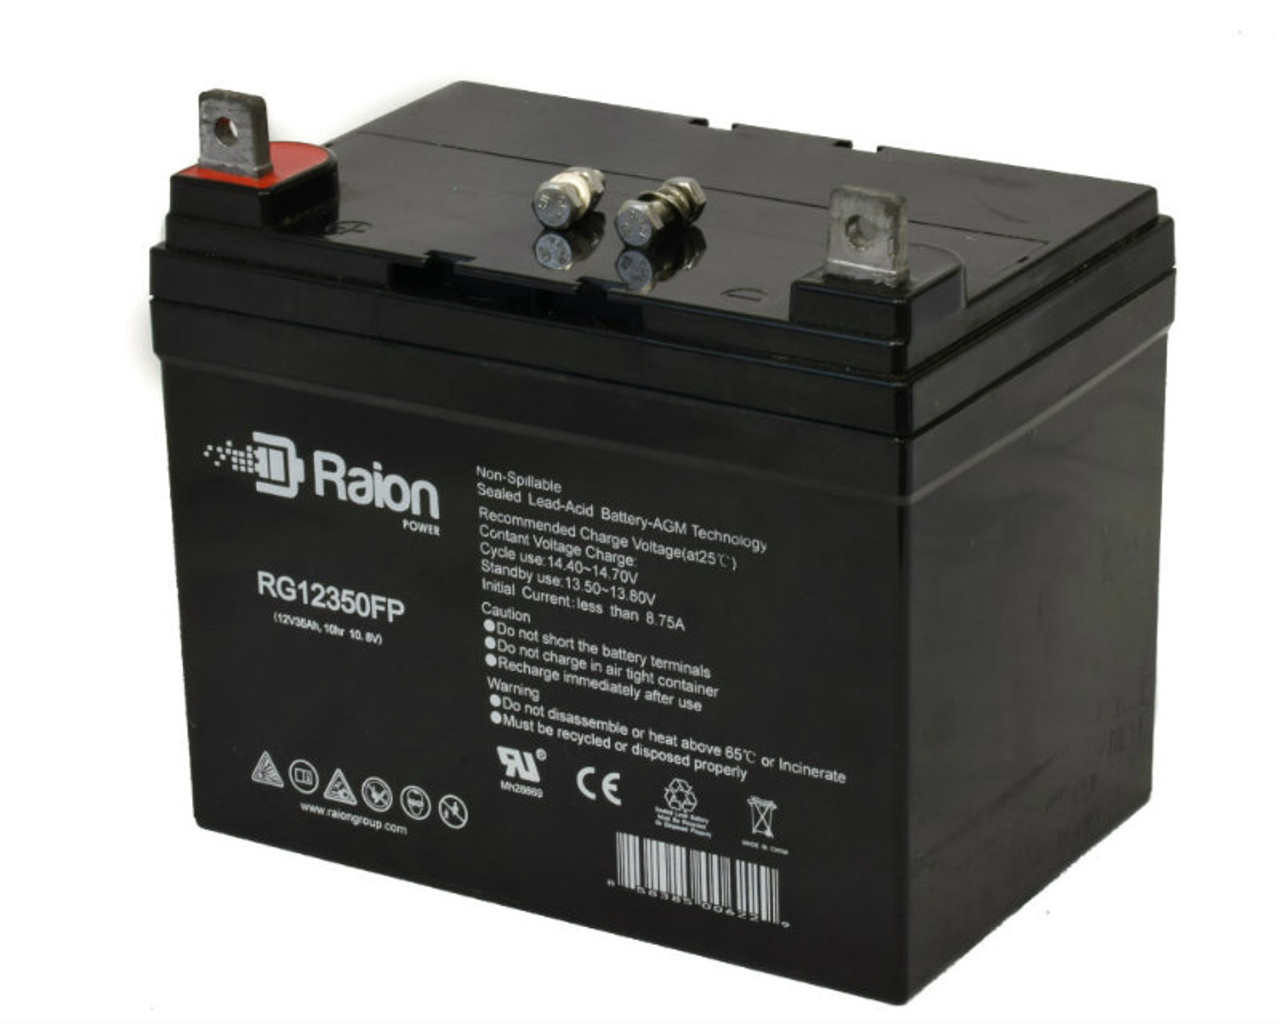 Raion Power Replacement 12V 35Ah RG12350FP Battery for Agco Allis 1717H